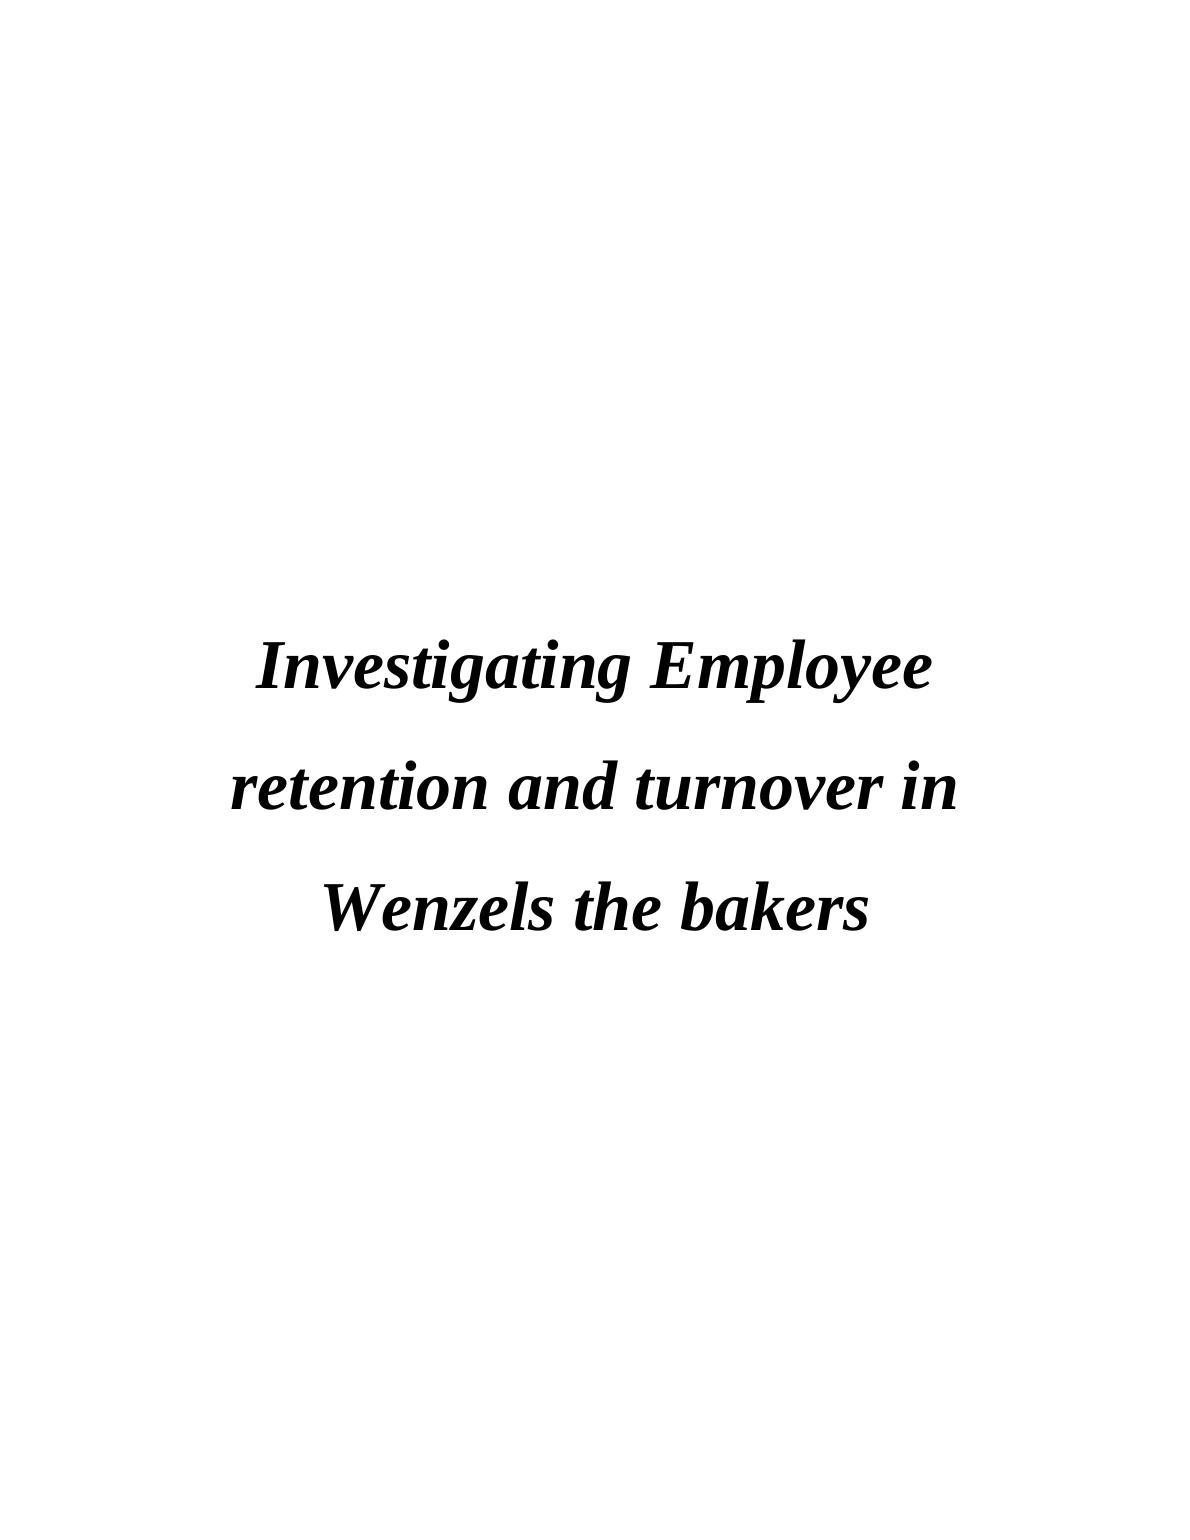 Research Design Approach to Employee Retention and Turnover in Wenzels the bakers_1